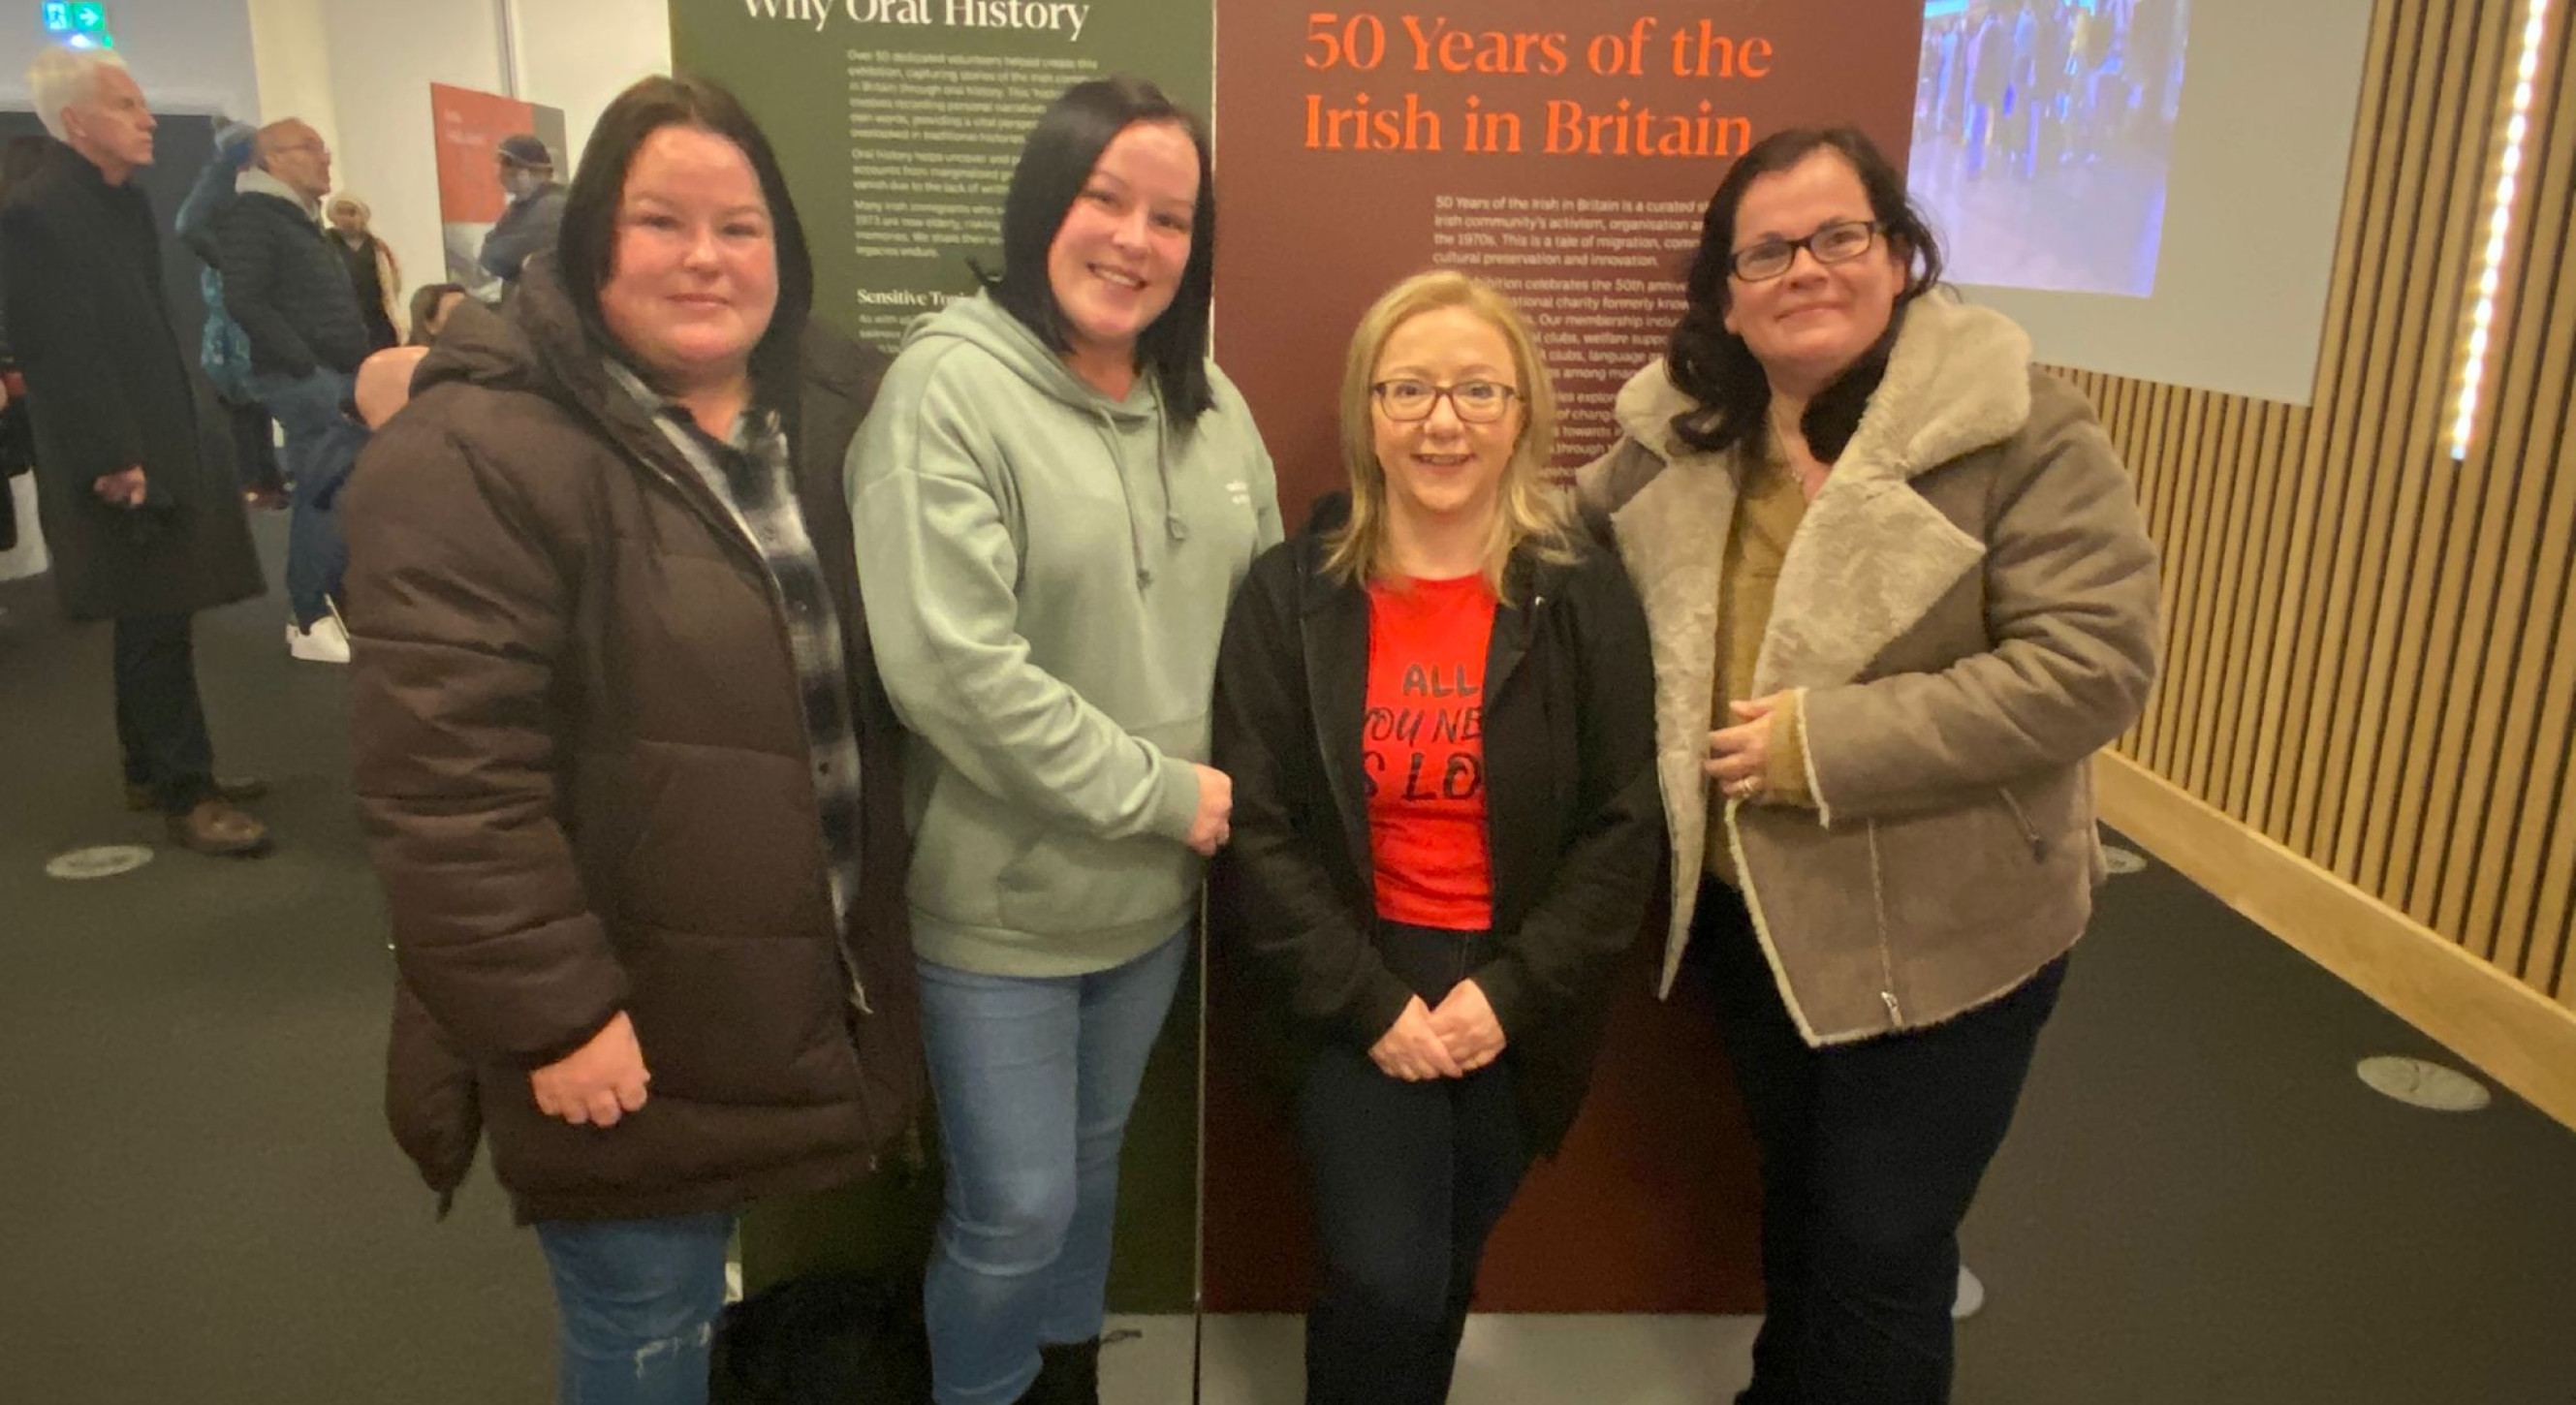 Caroline, Donna and Bez Keane, who won their legal case for the right to have an Irish inscription on their mother's grave with volunteer Eileen Doyle (in red)